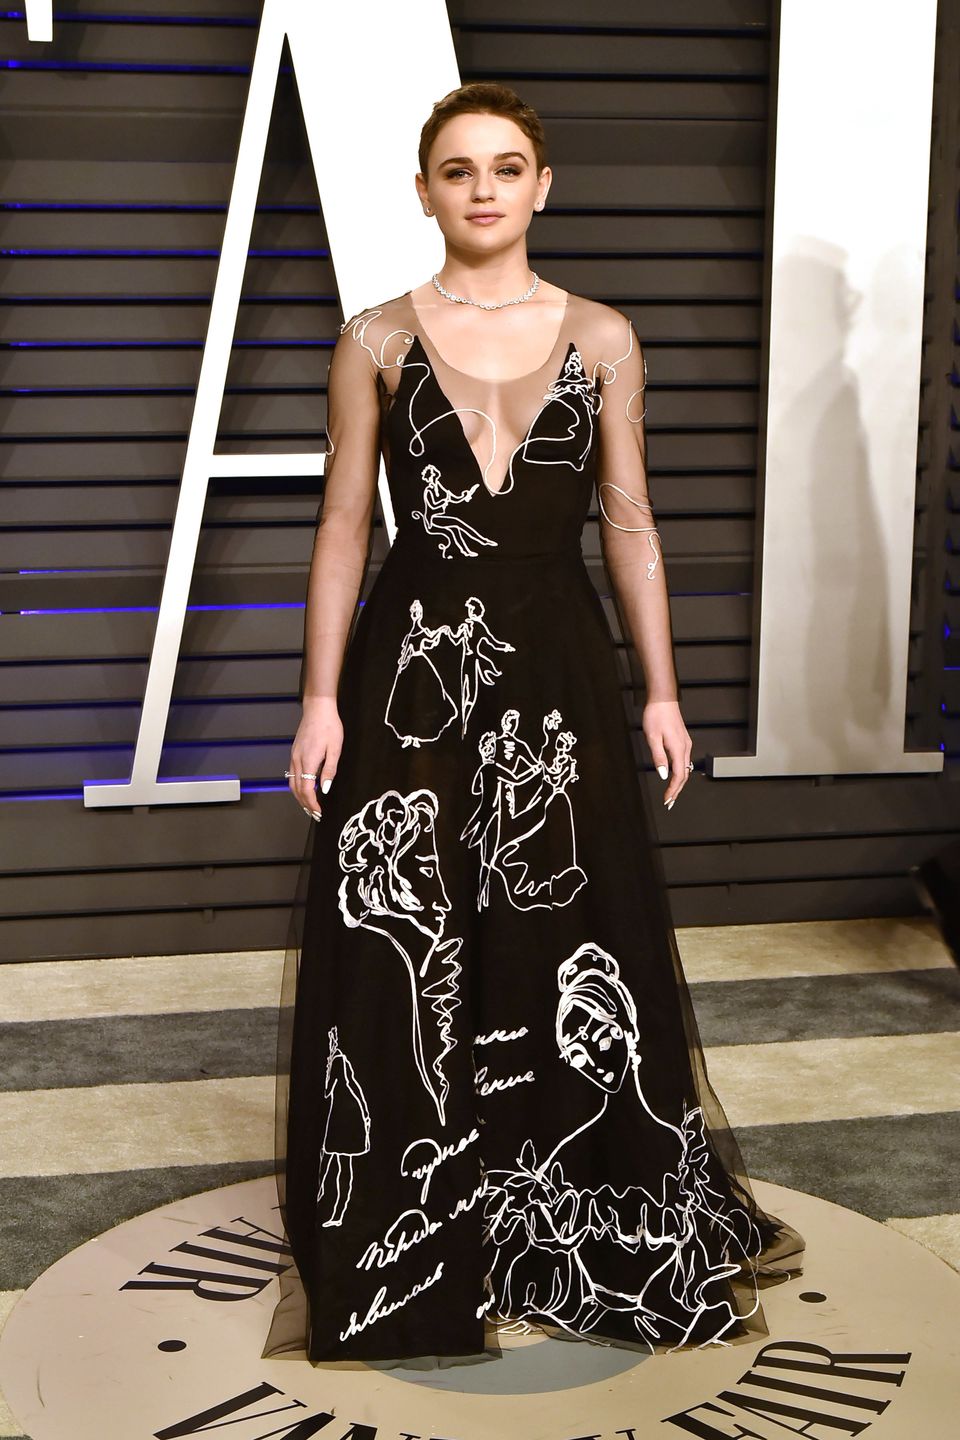 All The Vanity Fair Oscars Party Looks You Have To See | HuffPost Life